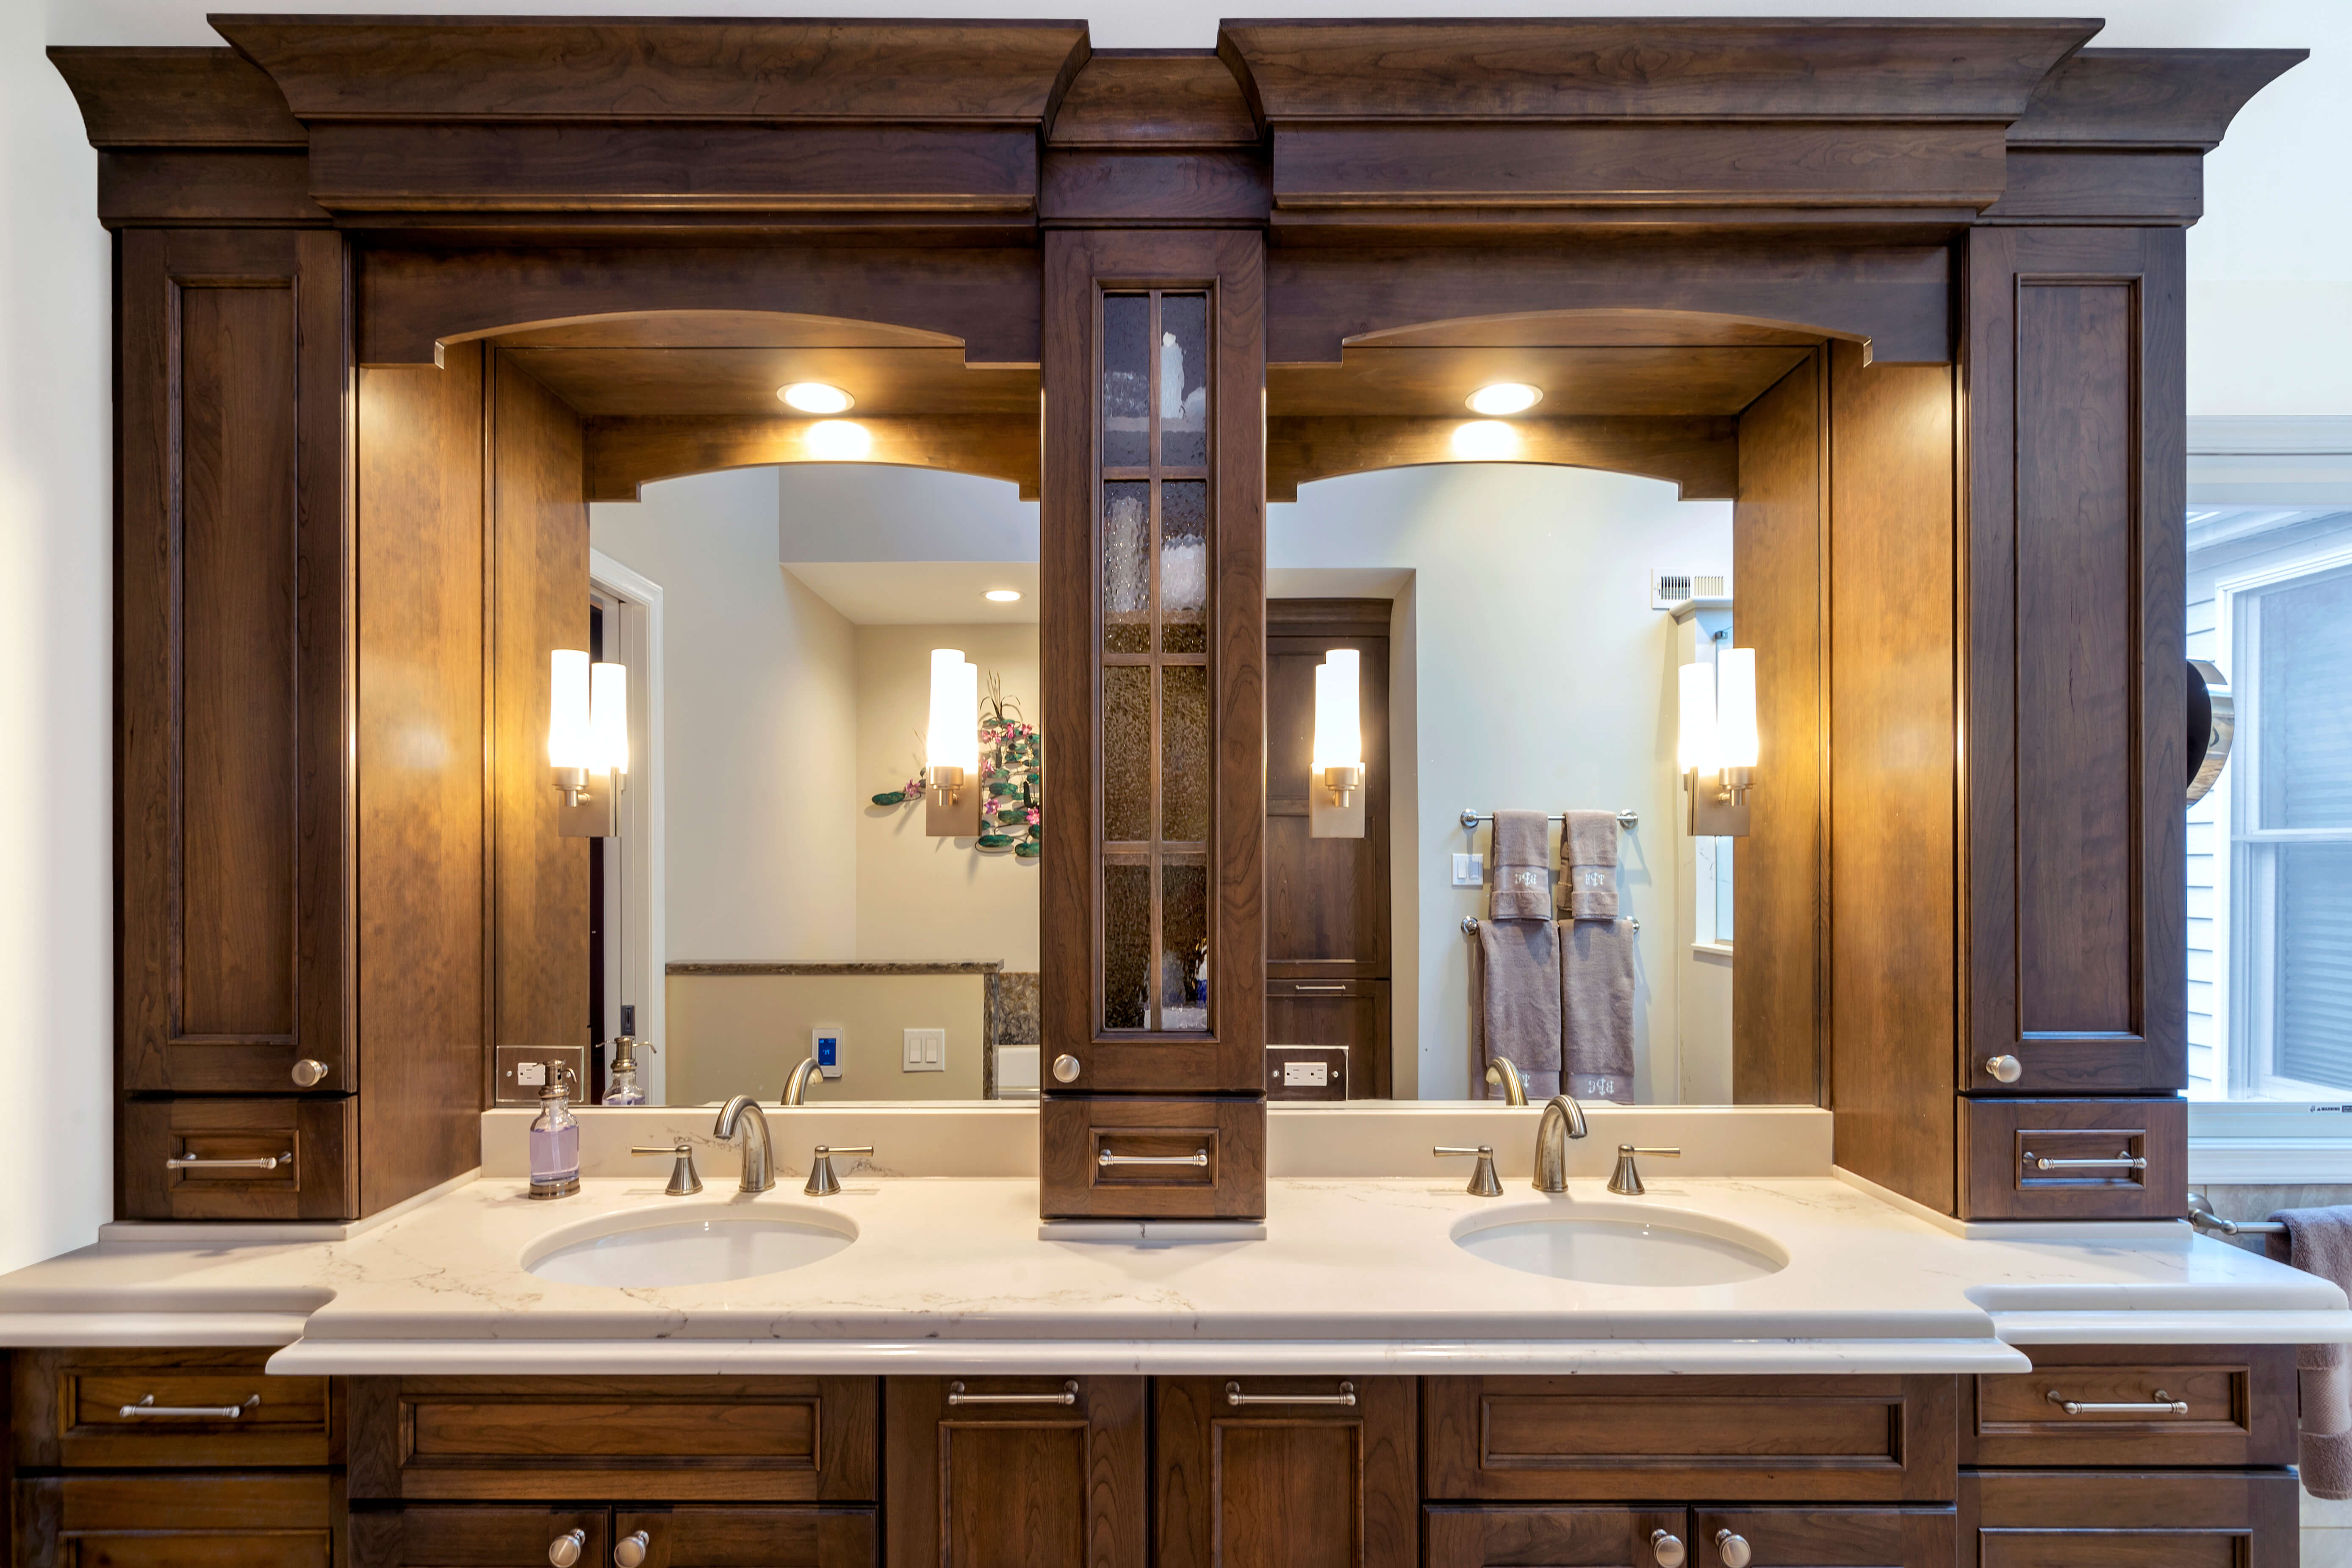 A double sink bathroom vanity with divided mirrors and a tall tower in between.